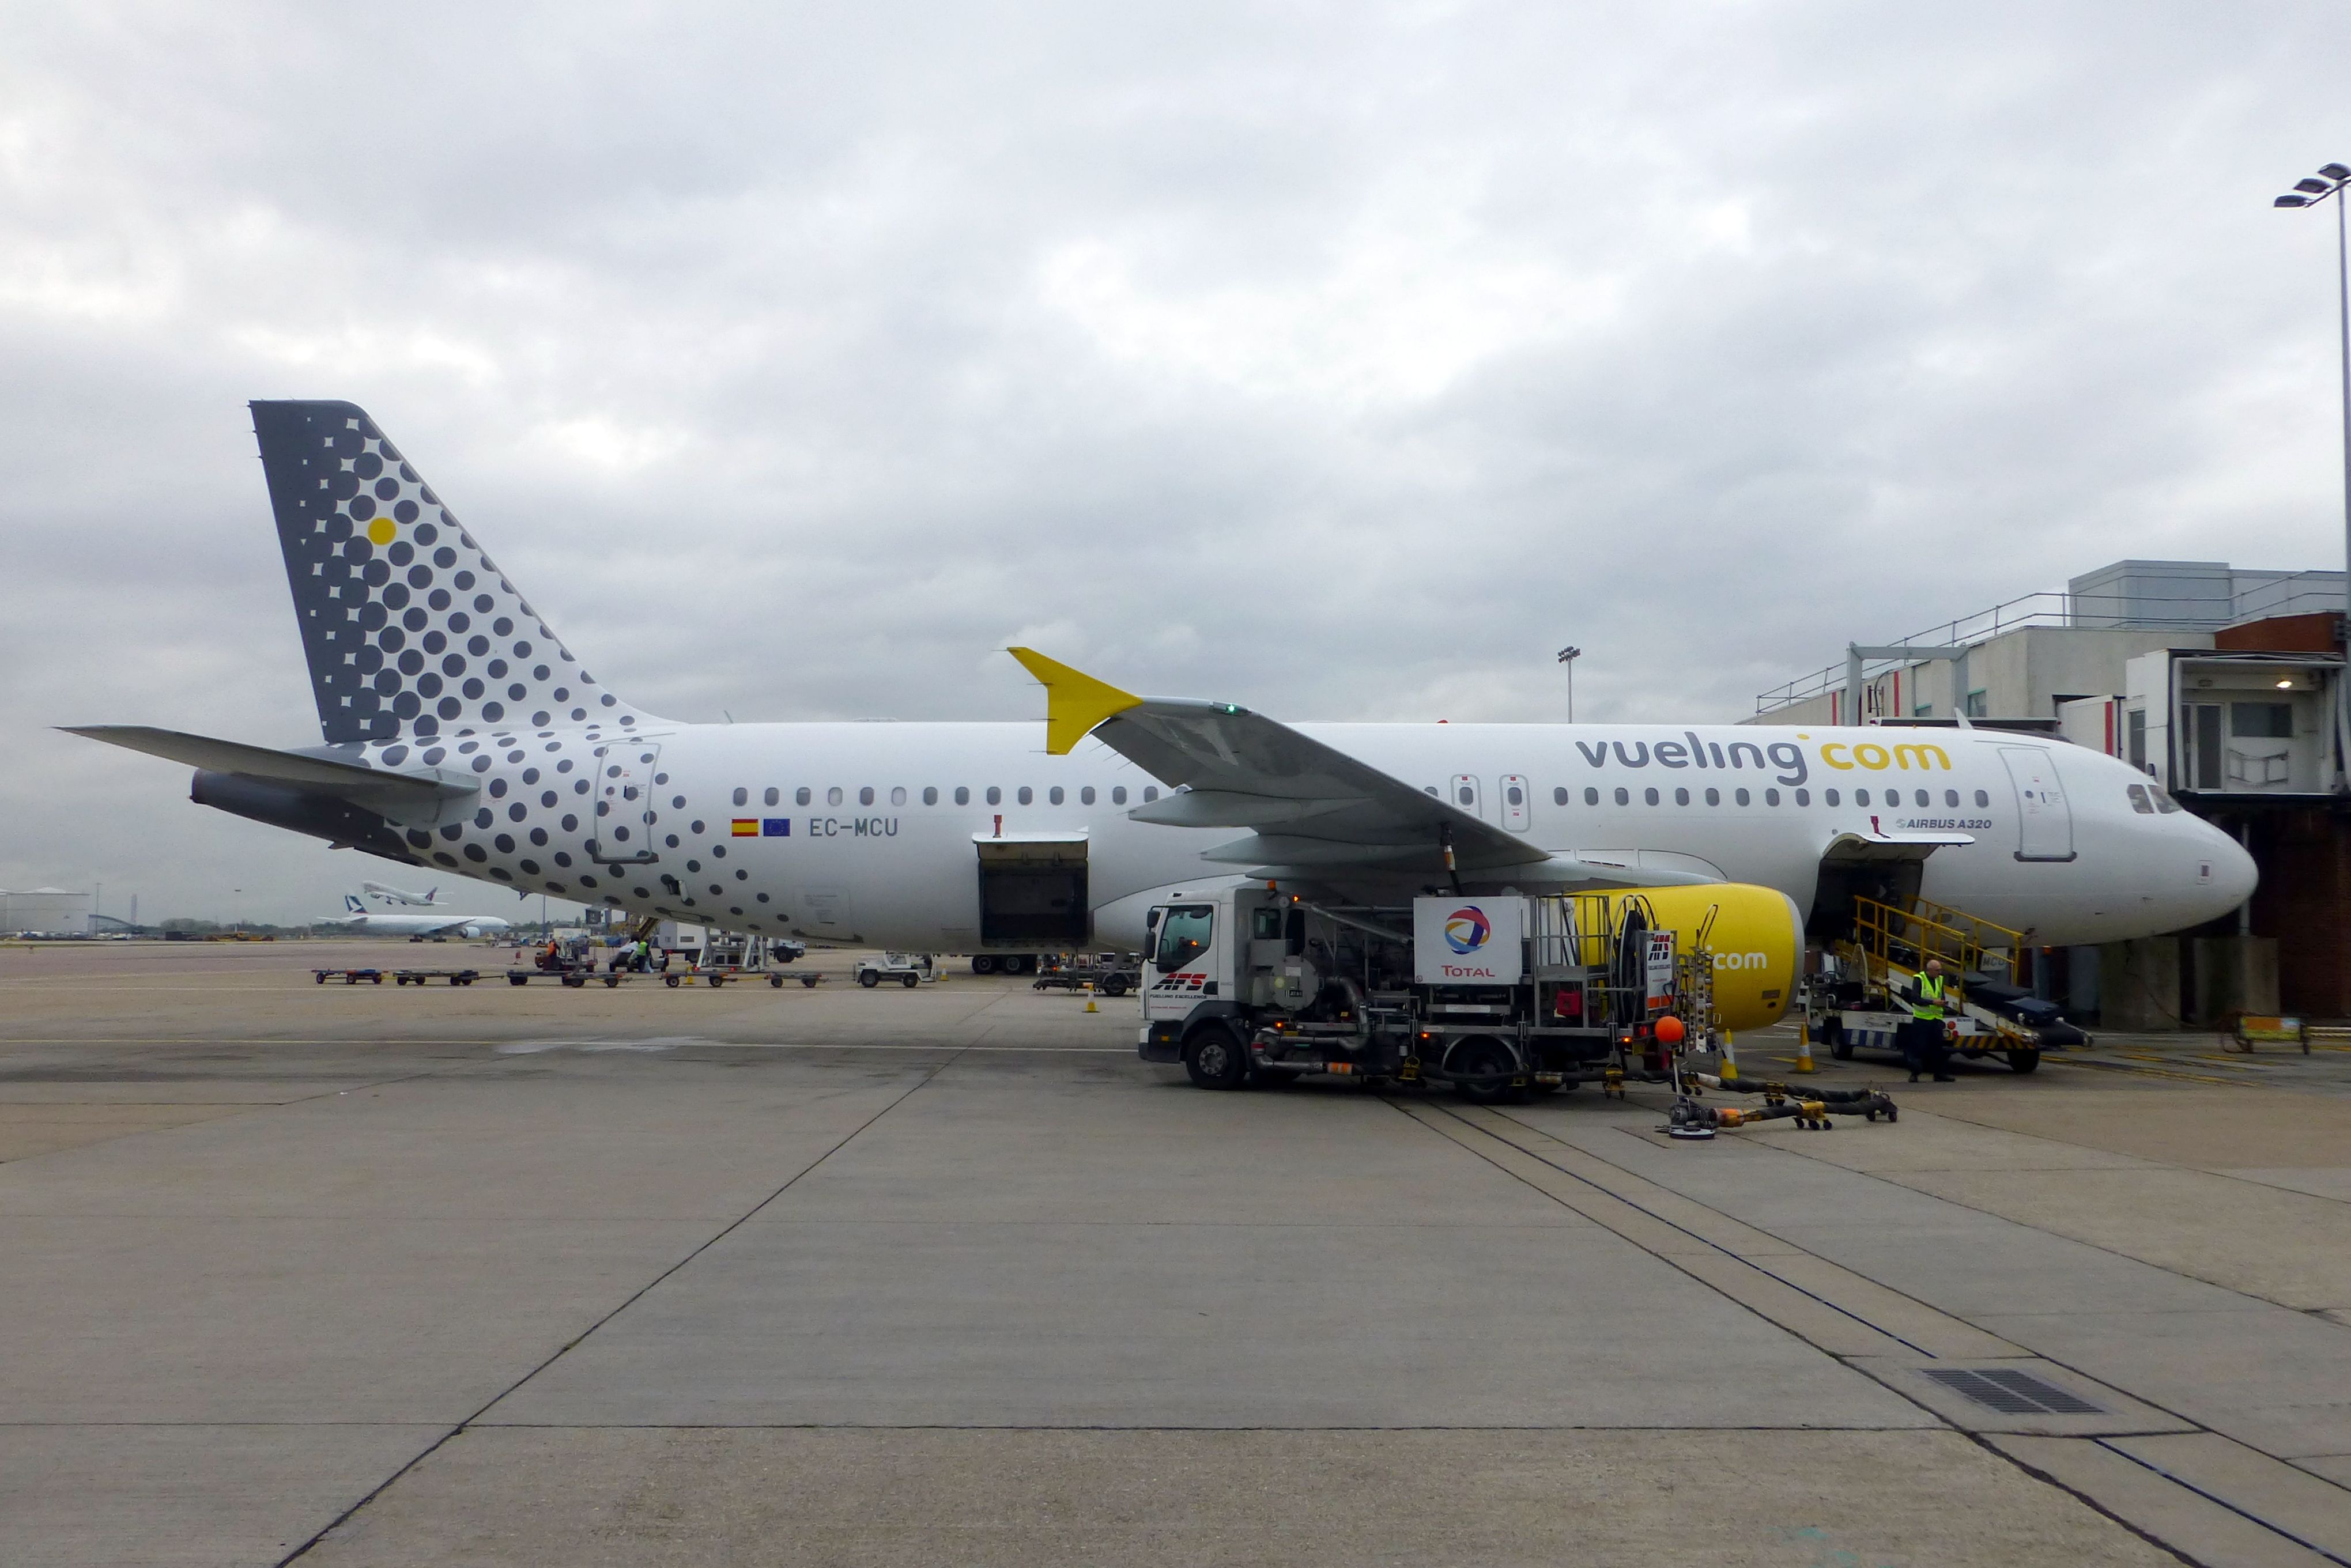 An Airbus A320 being refueled